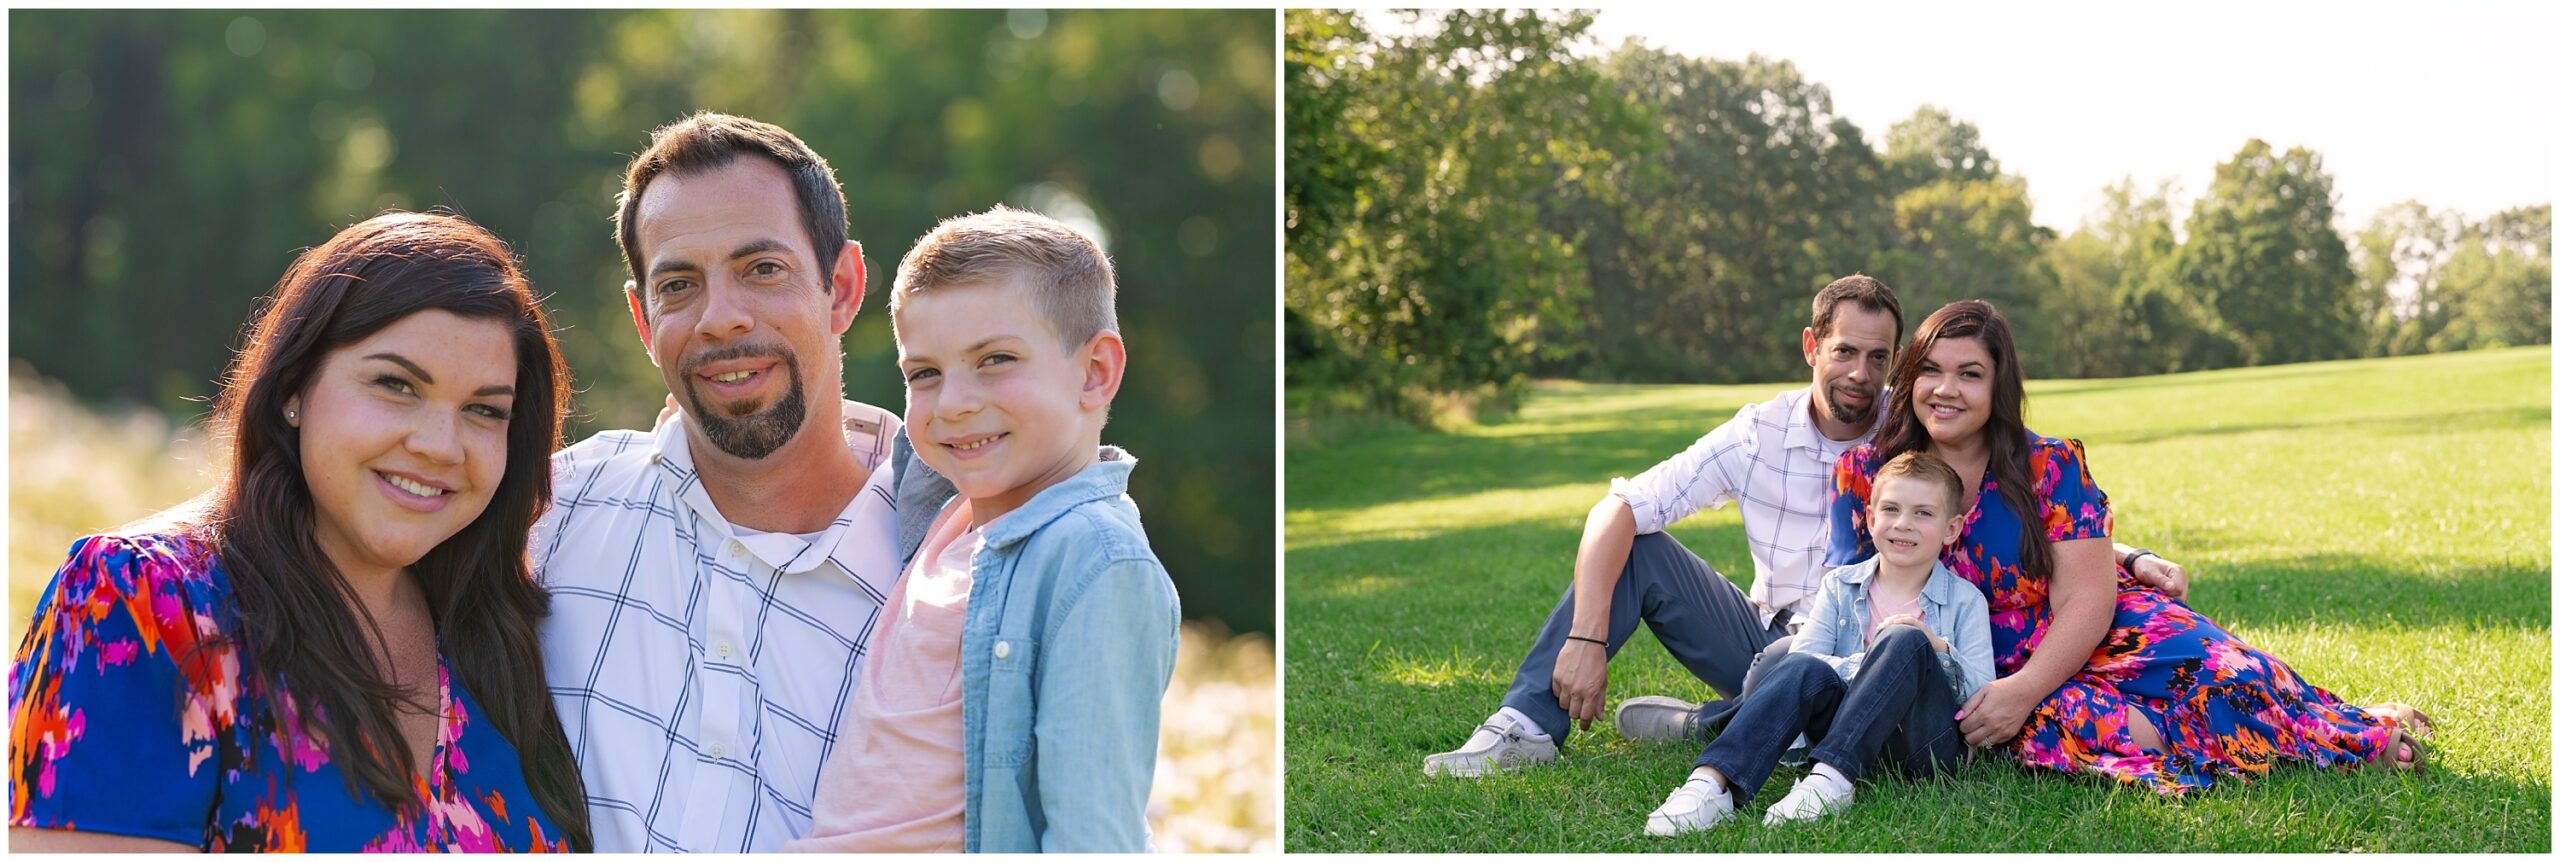 Outdoor Family Portrait Session in Boyce Park located in Plum, PA 